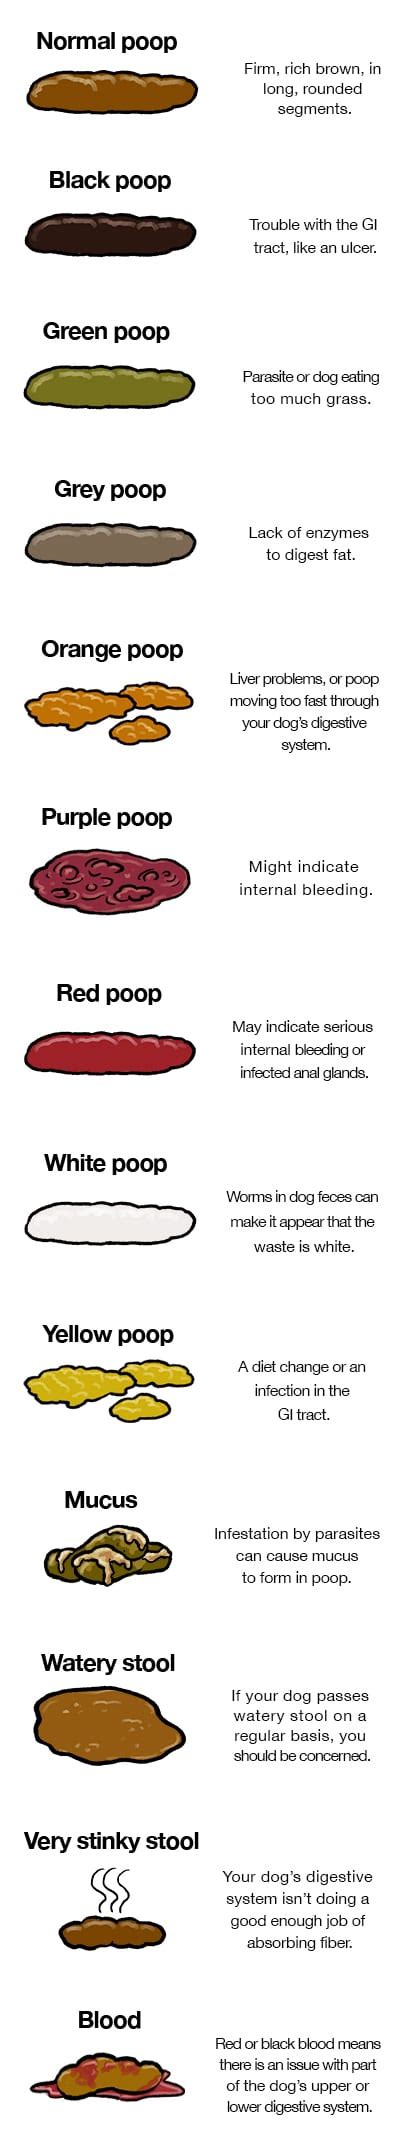 Stool Quality Chart For Dog Poop Dog Poo Chart What The Colour Is